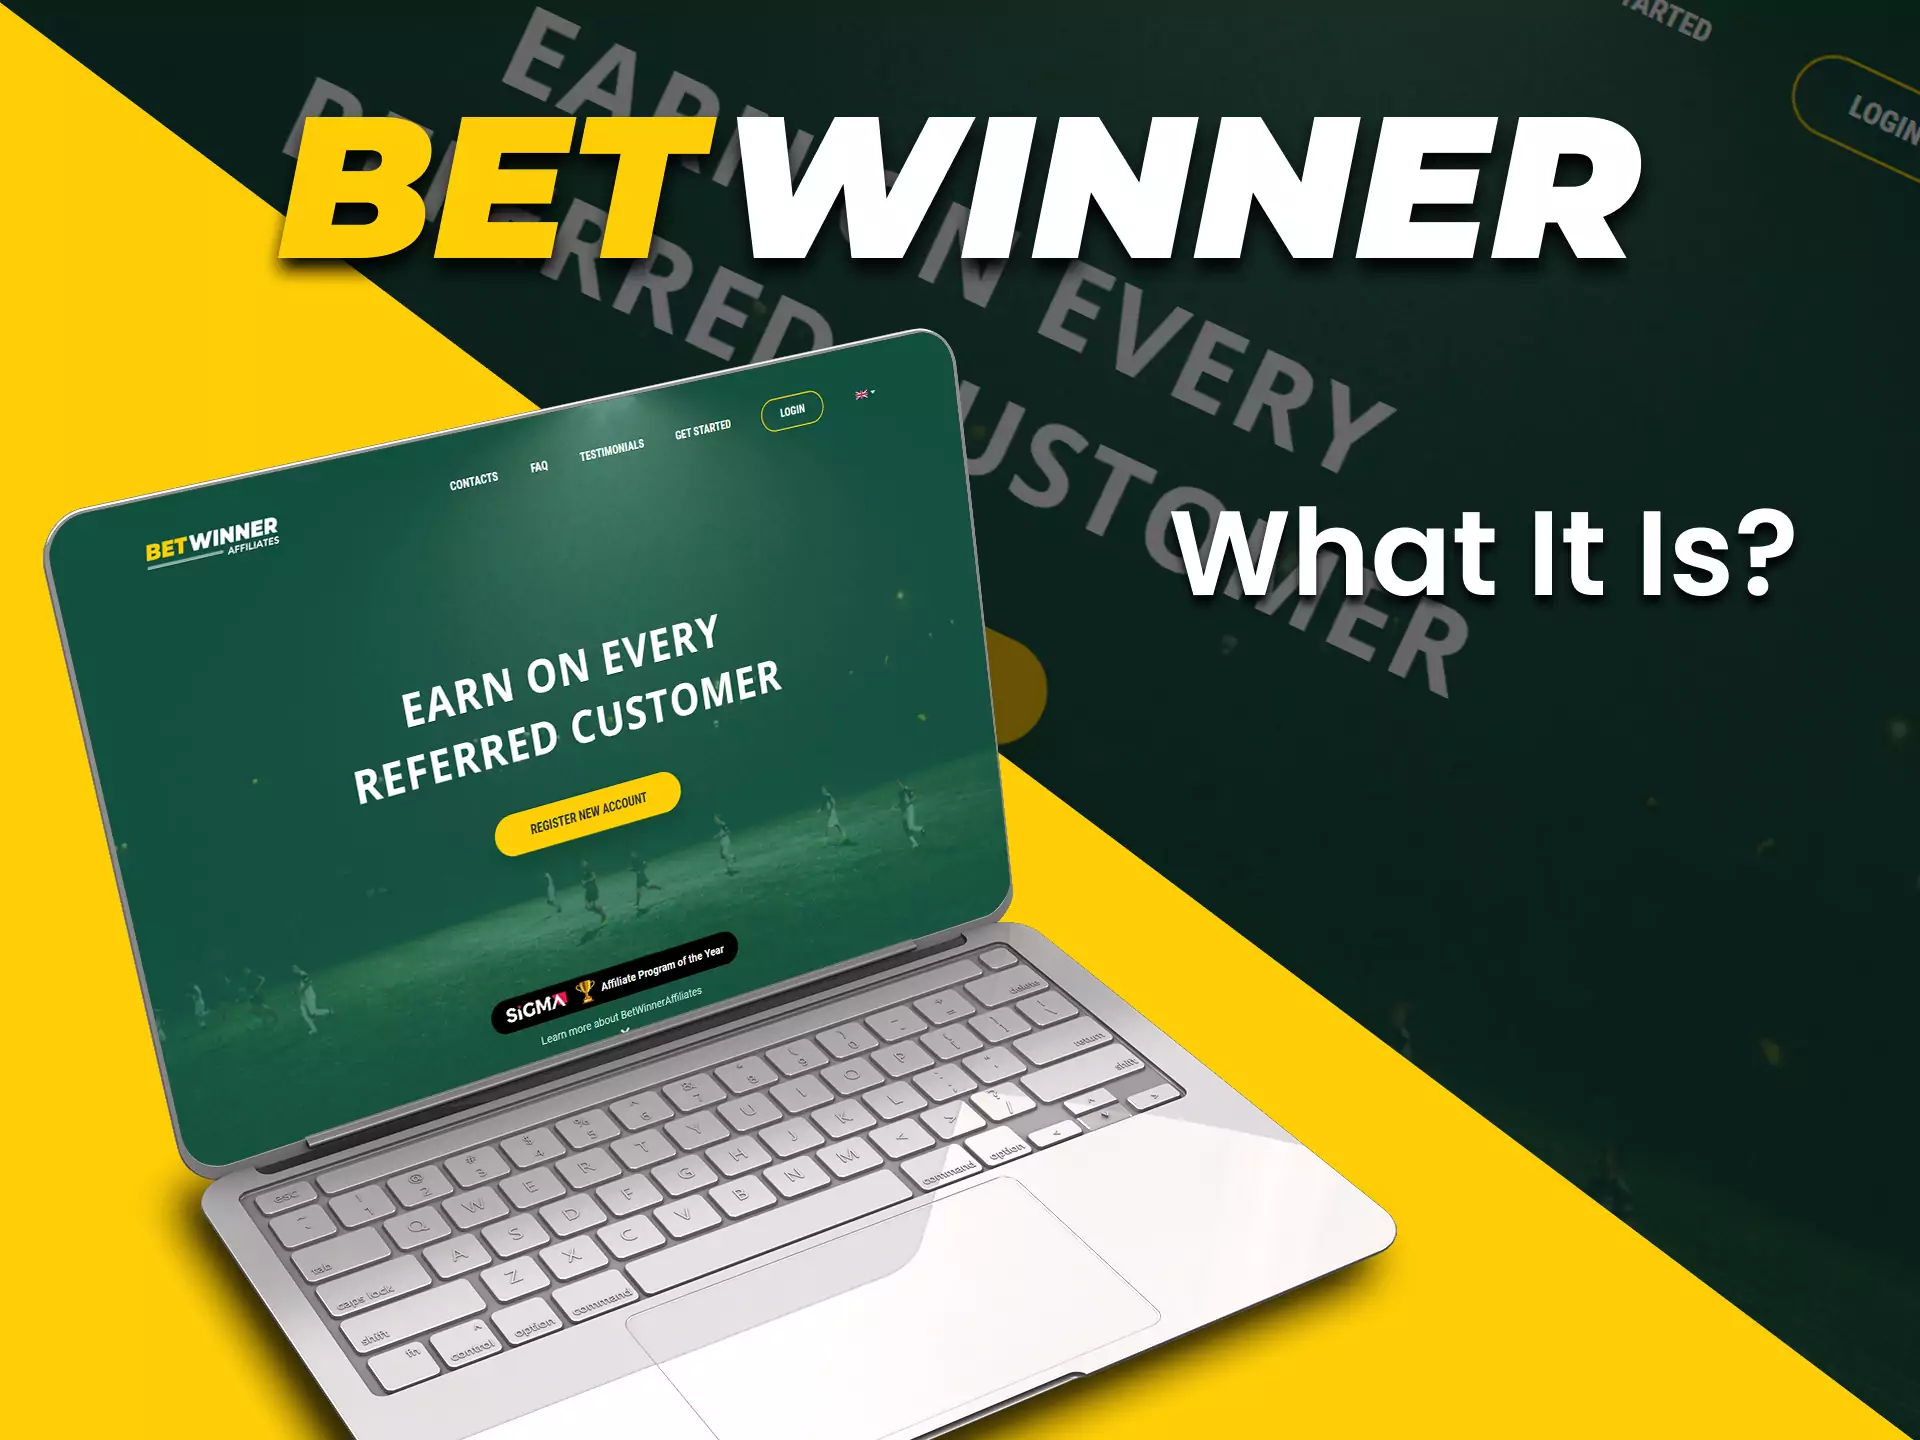 The Betwinner affiliate program allows getting money from inviting new users to the platform.